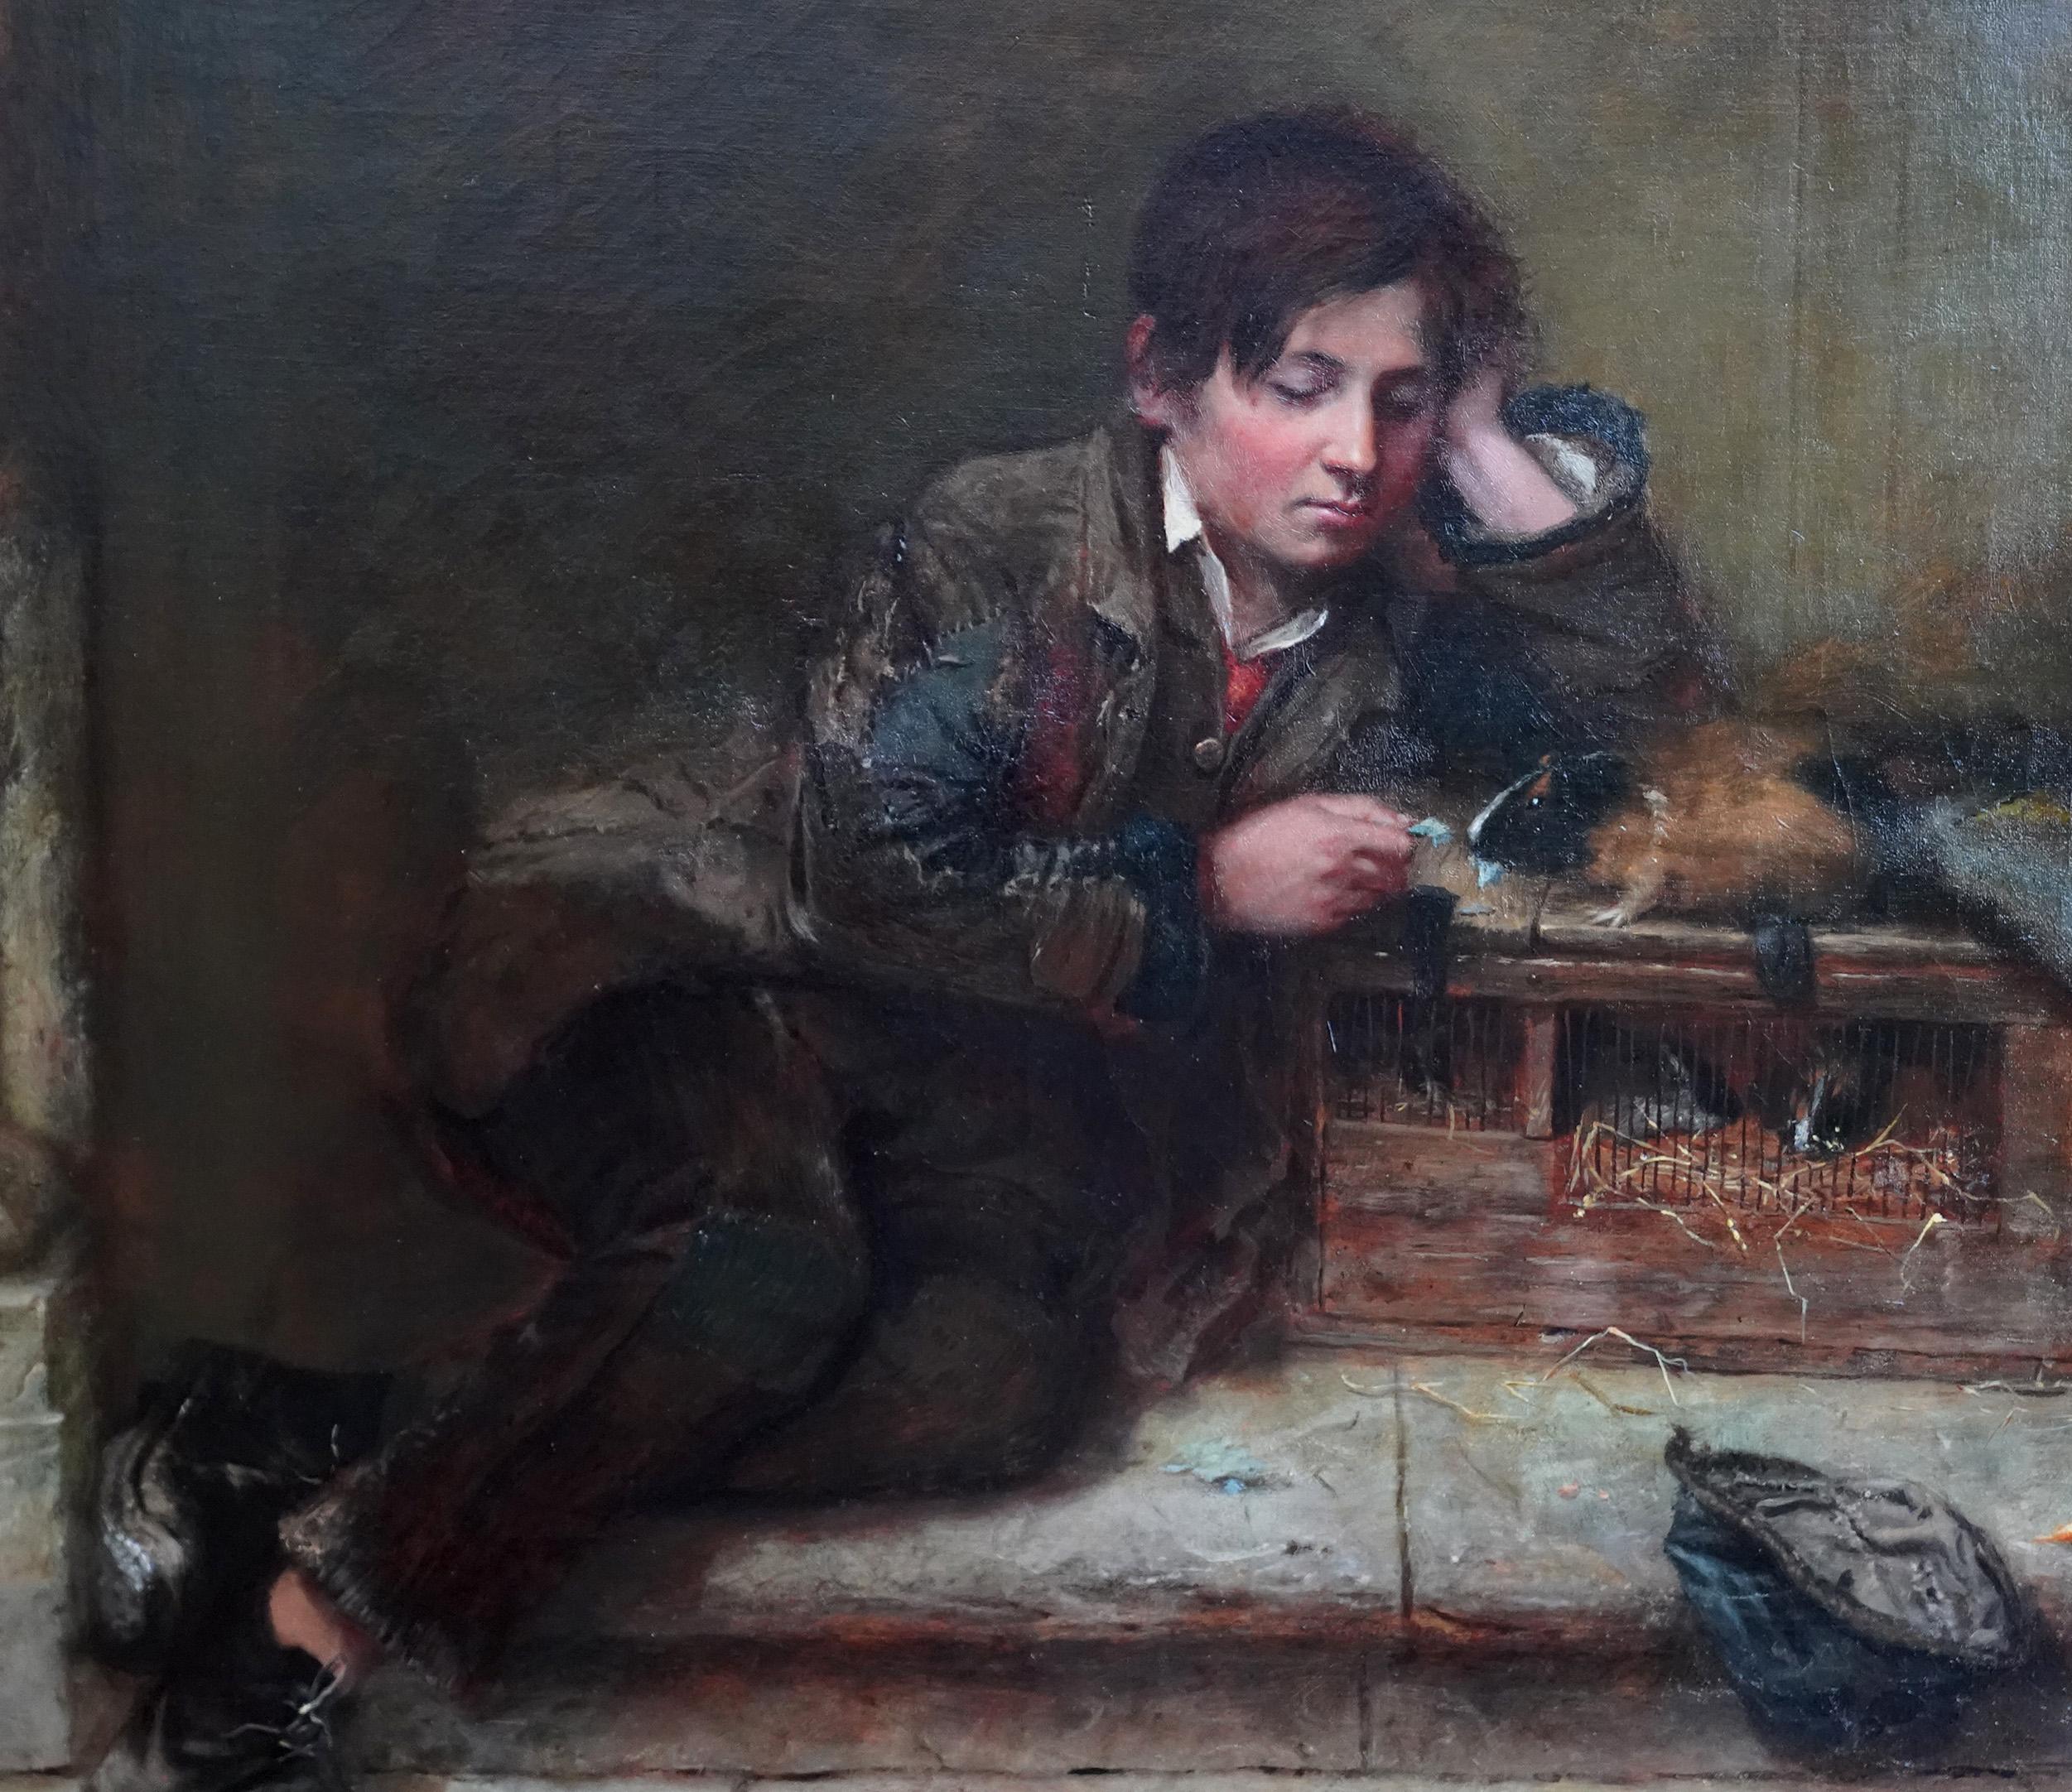 This charming British Victorian genre oil painting is by noted exhibited artist Henry Tuner Munns. It was painted in 1865 in realist palette with superb detail in the young boy's face and heavy impasto on his clothing. The subject is a boy in ragged